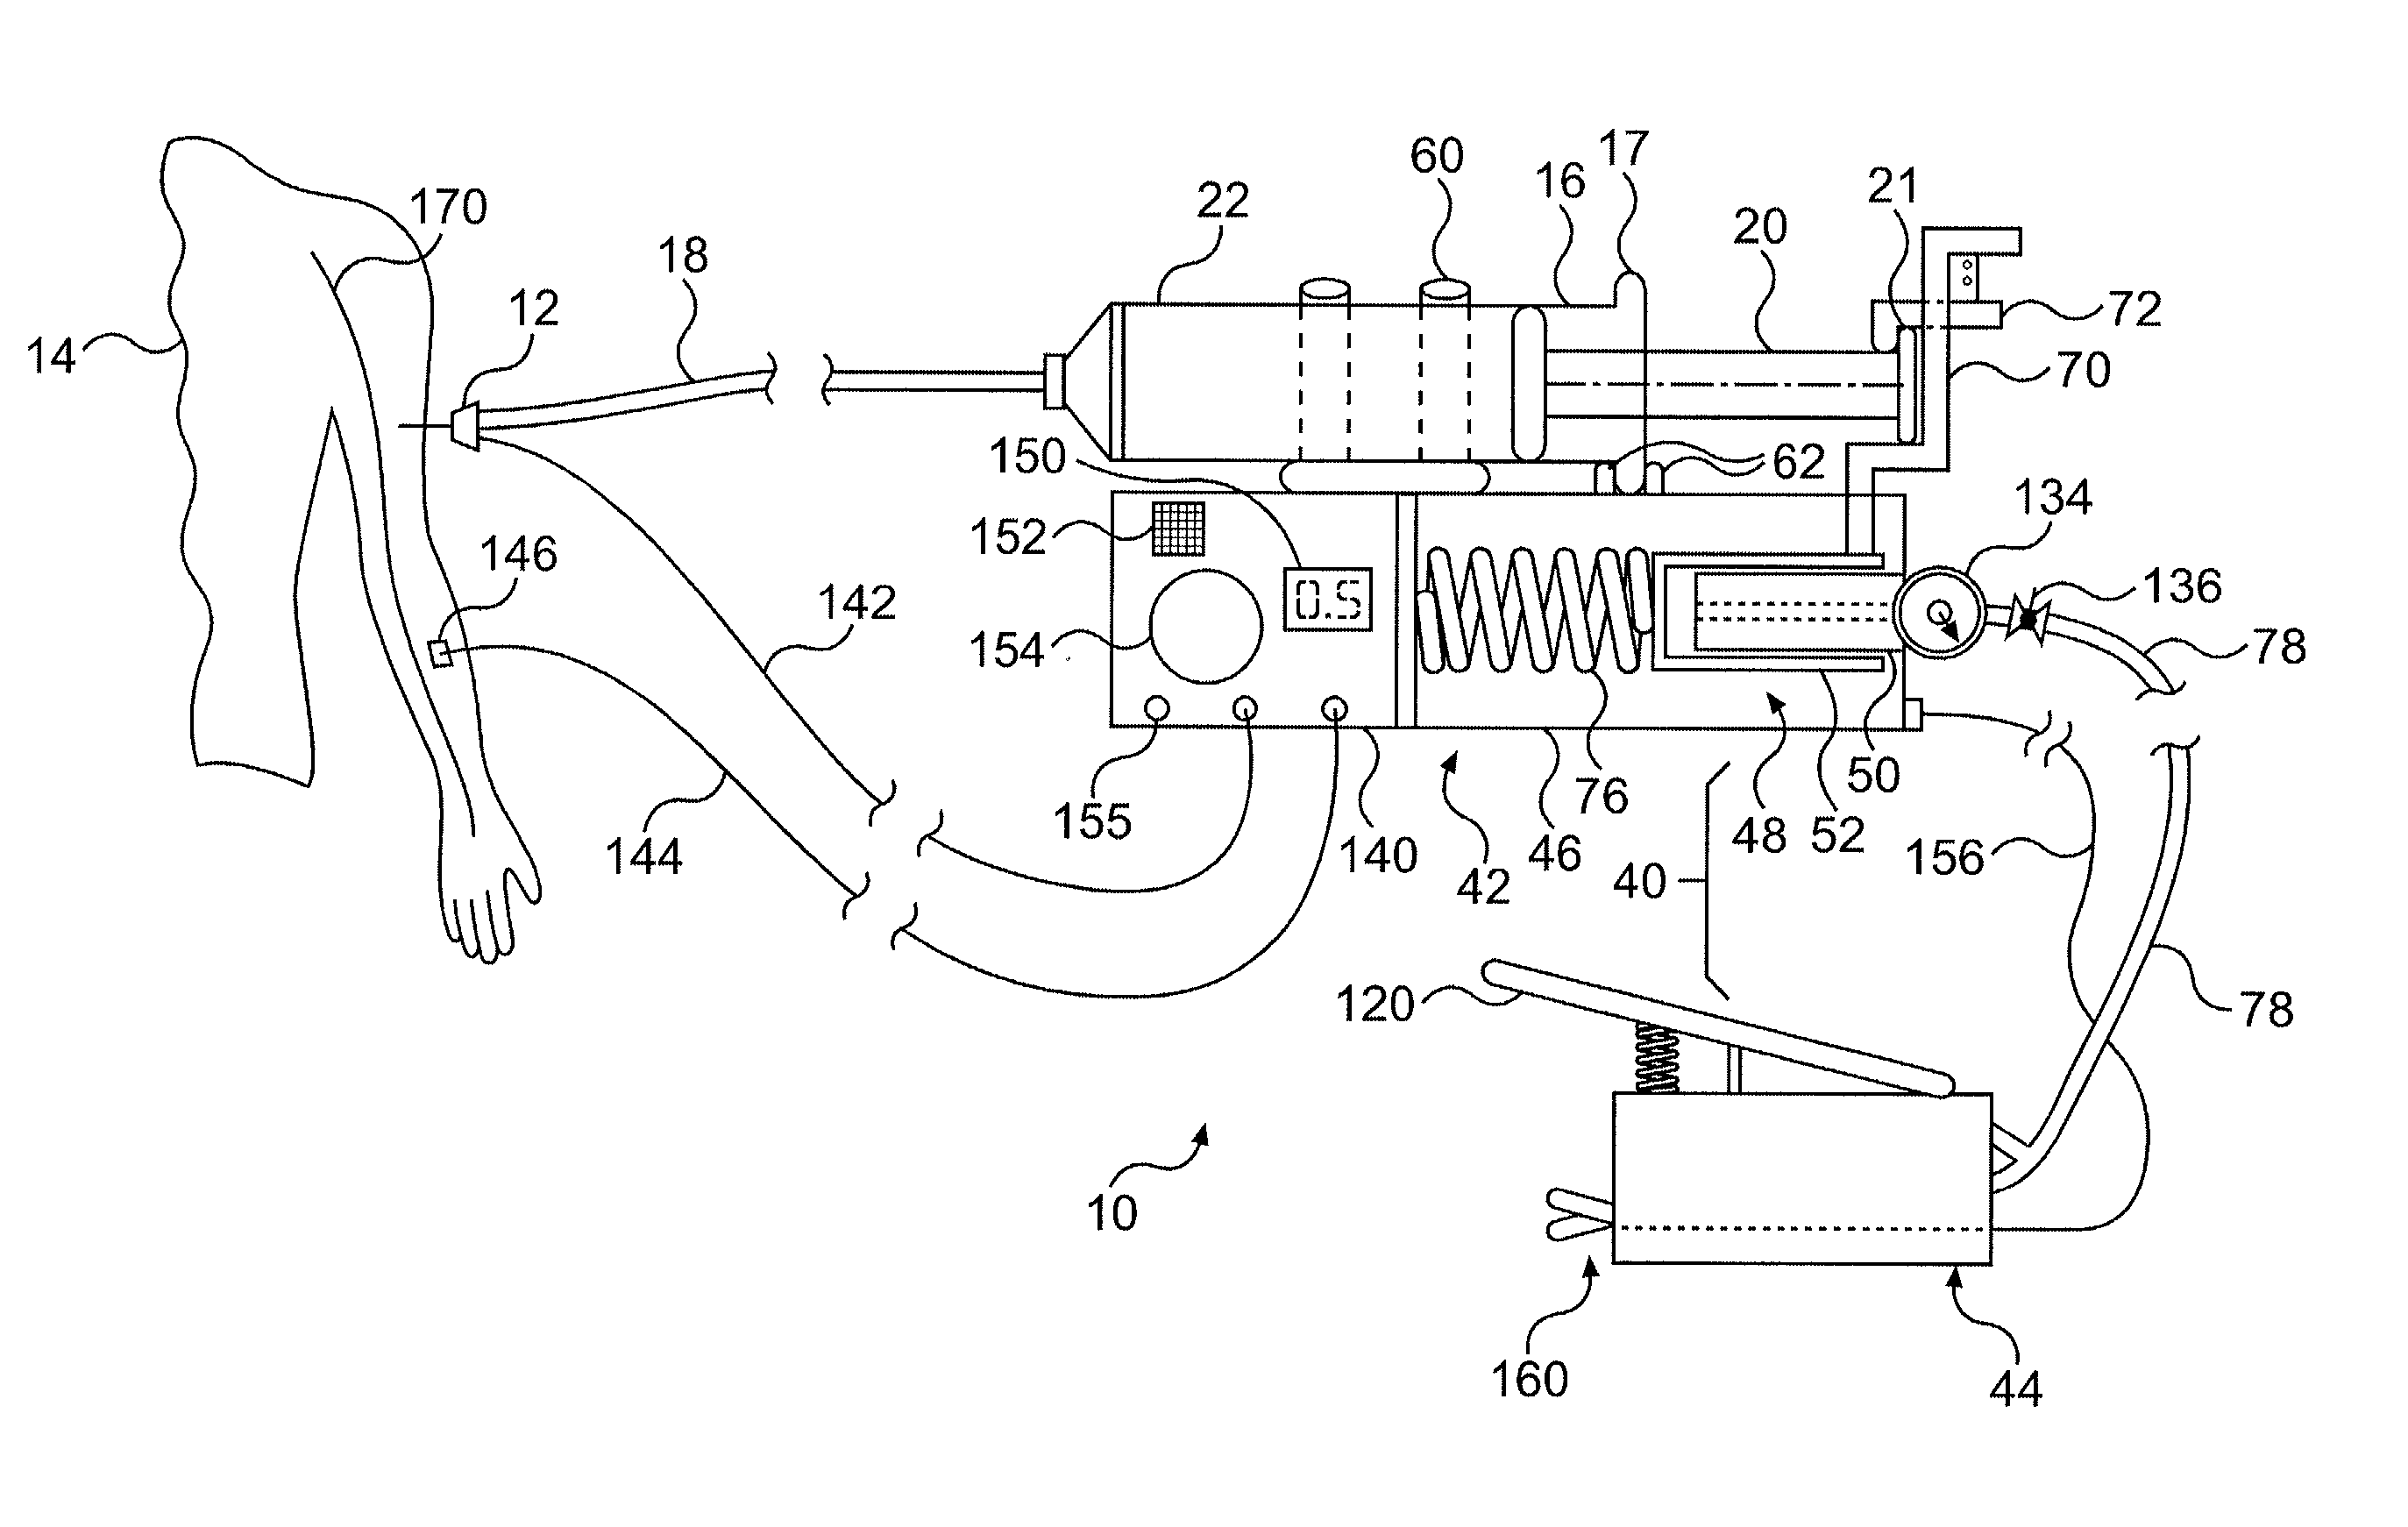 Apparatus for locating and anesthetizing nerve groups